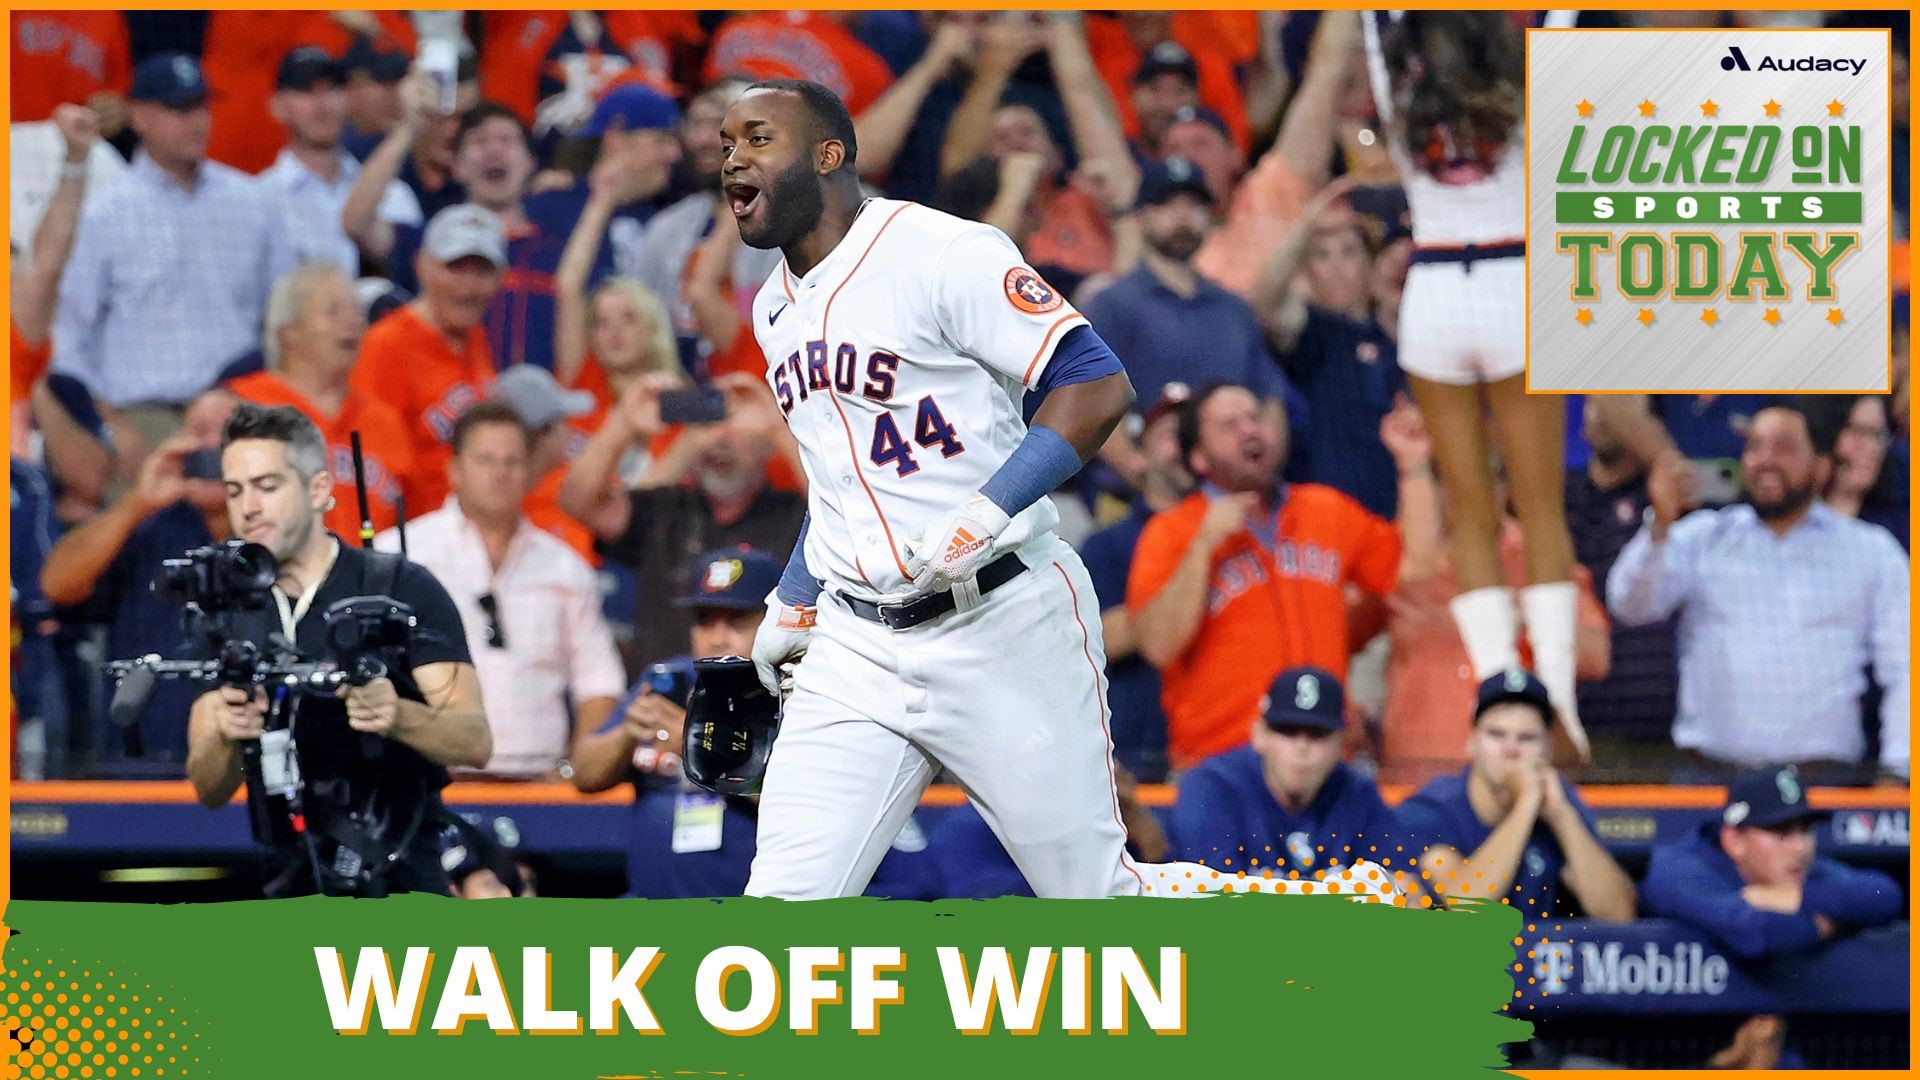 Discussing the day's top sport stories from the Yankees winning game 1 of the ALDS despite roster drama to the Astros big walk-off win.